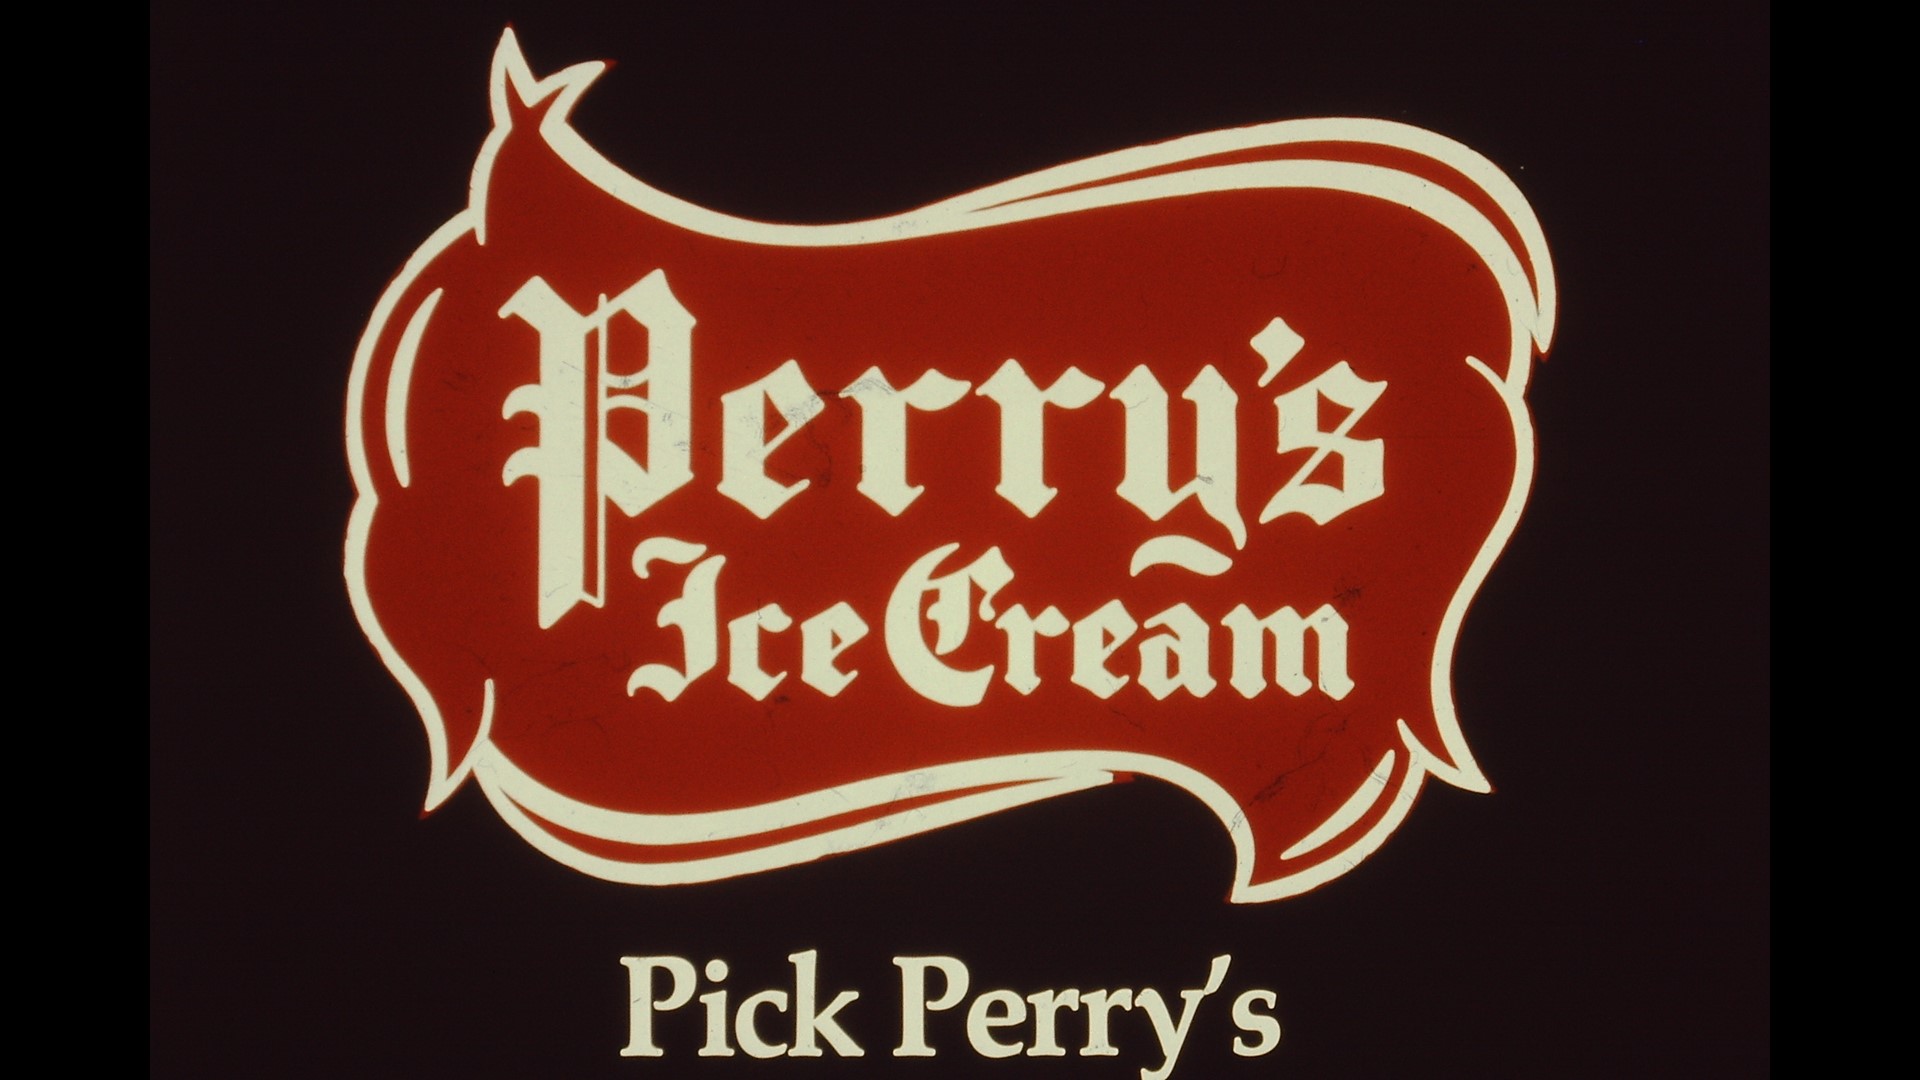 Just two weeks after launching new flavors, Perry’s Ice Cream Co. has launched new novelty ice cream bars.